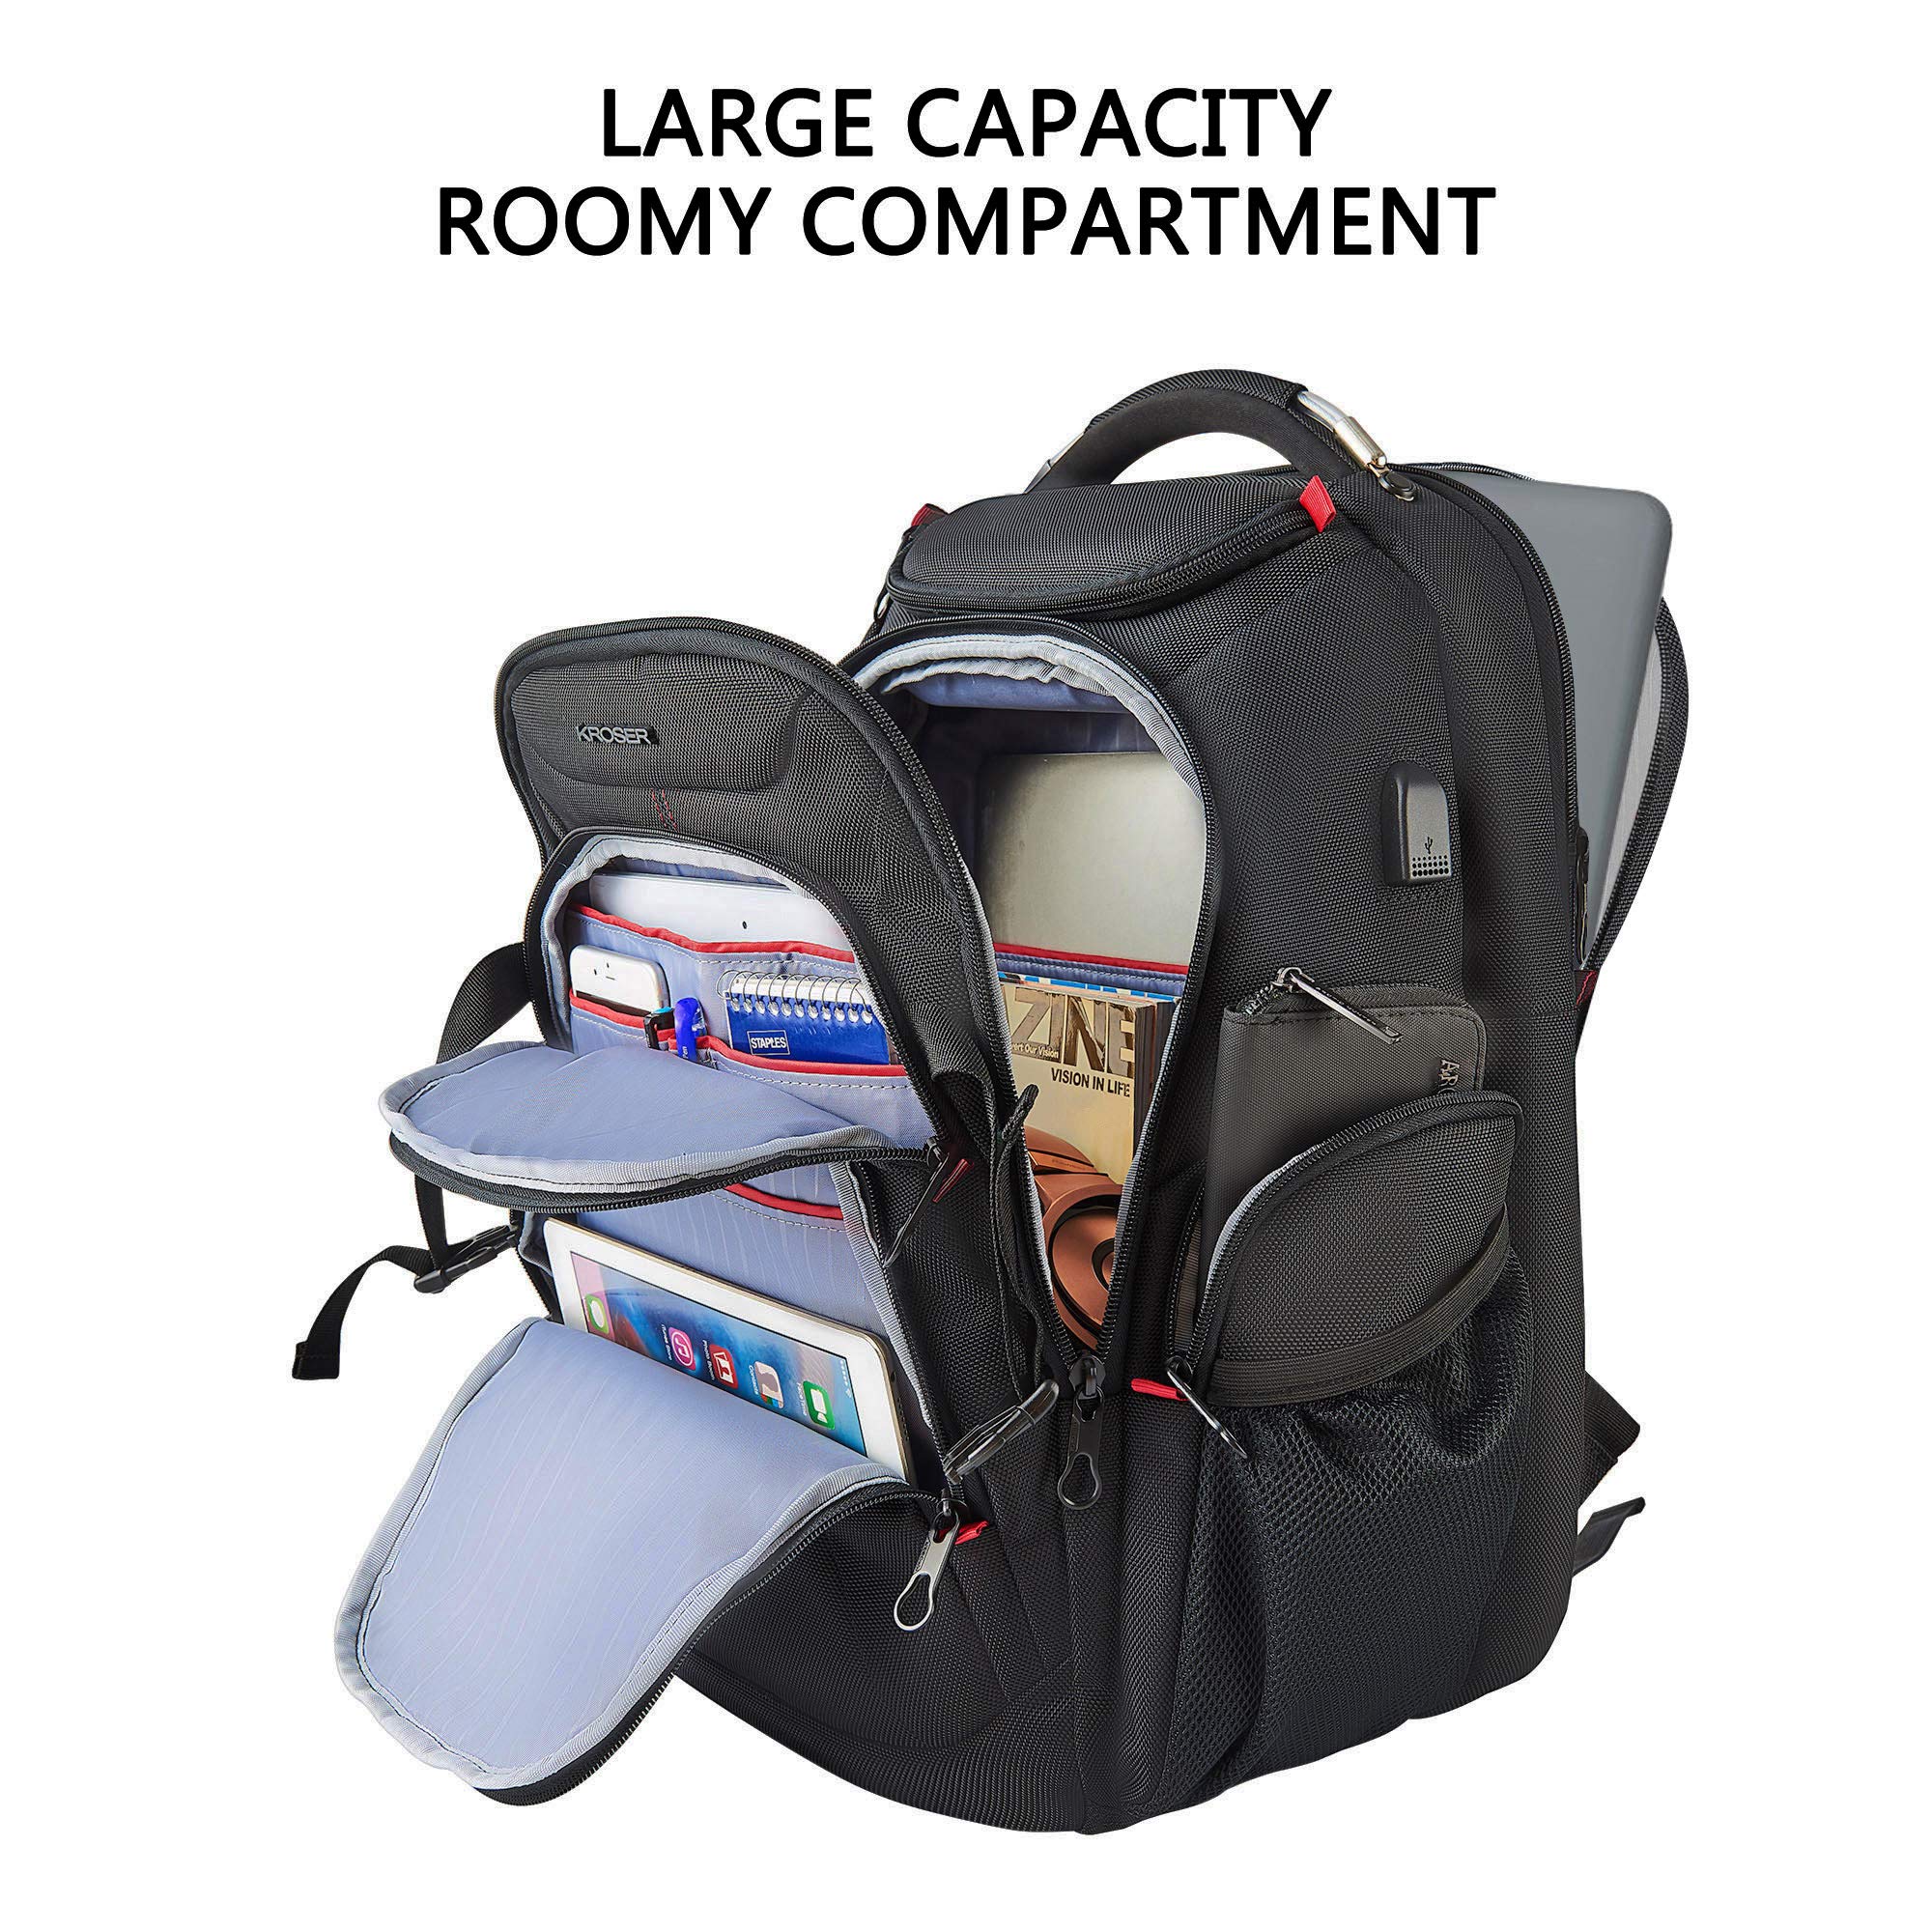 Rugged Travel MacBook Backpack compartments